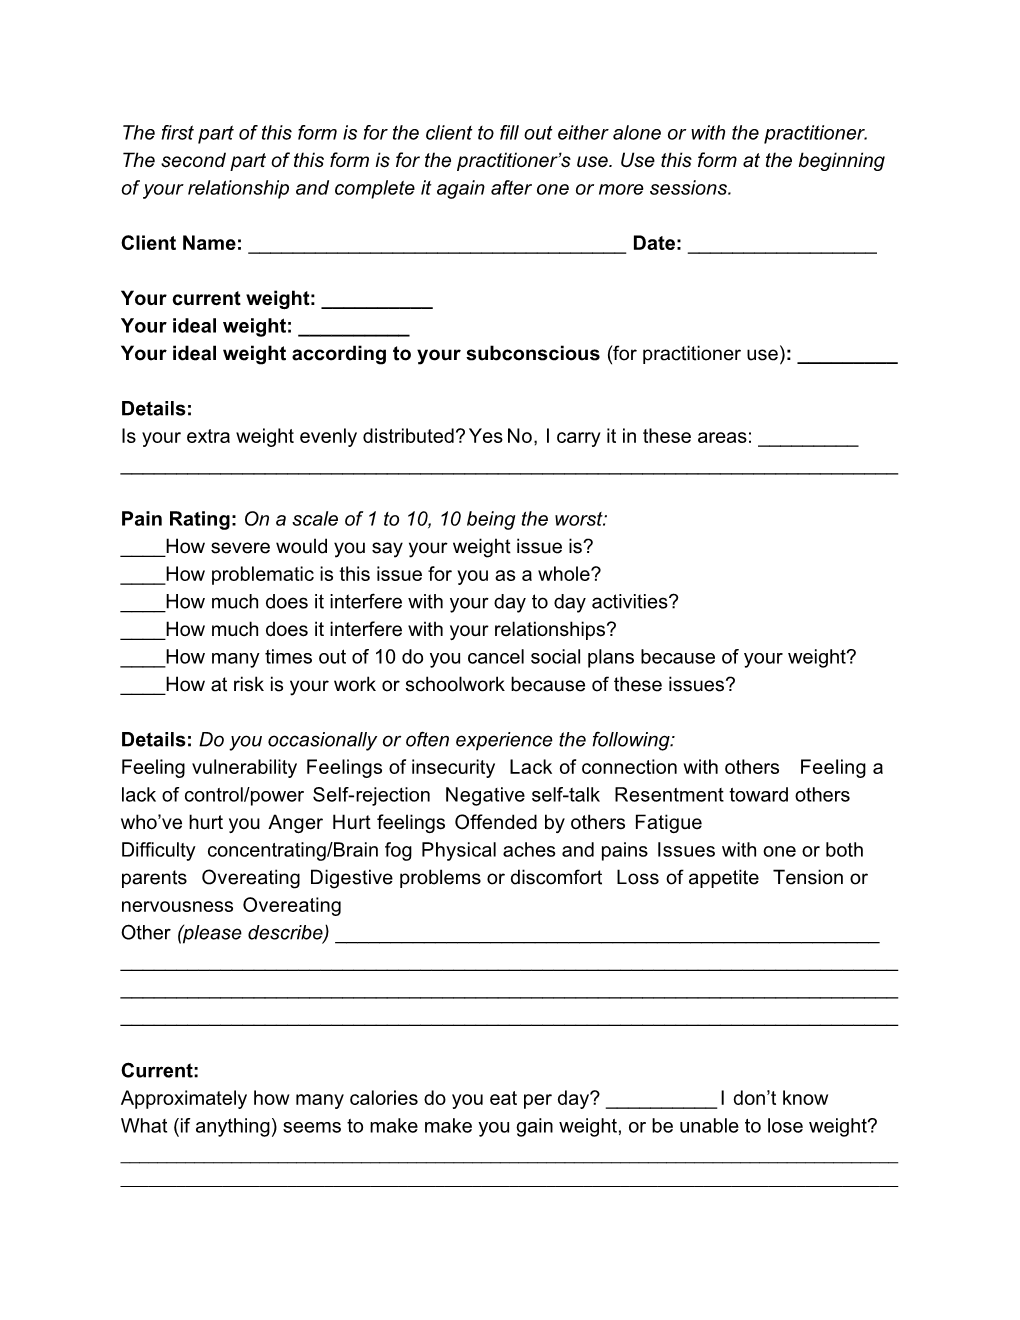 The First Part of This Form Is for the Client to Fill out Either Alone Or with The